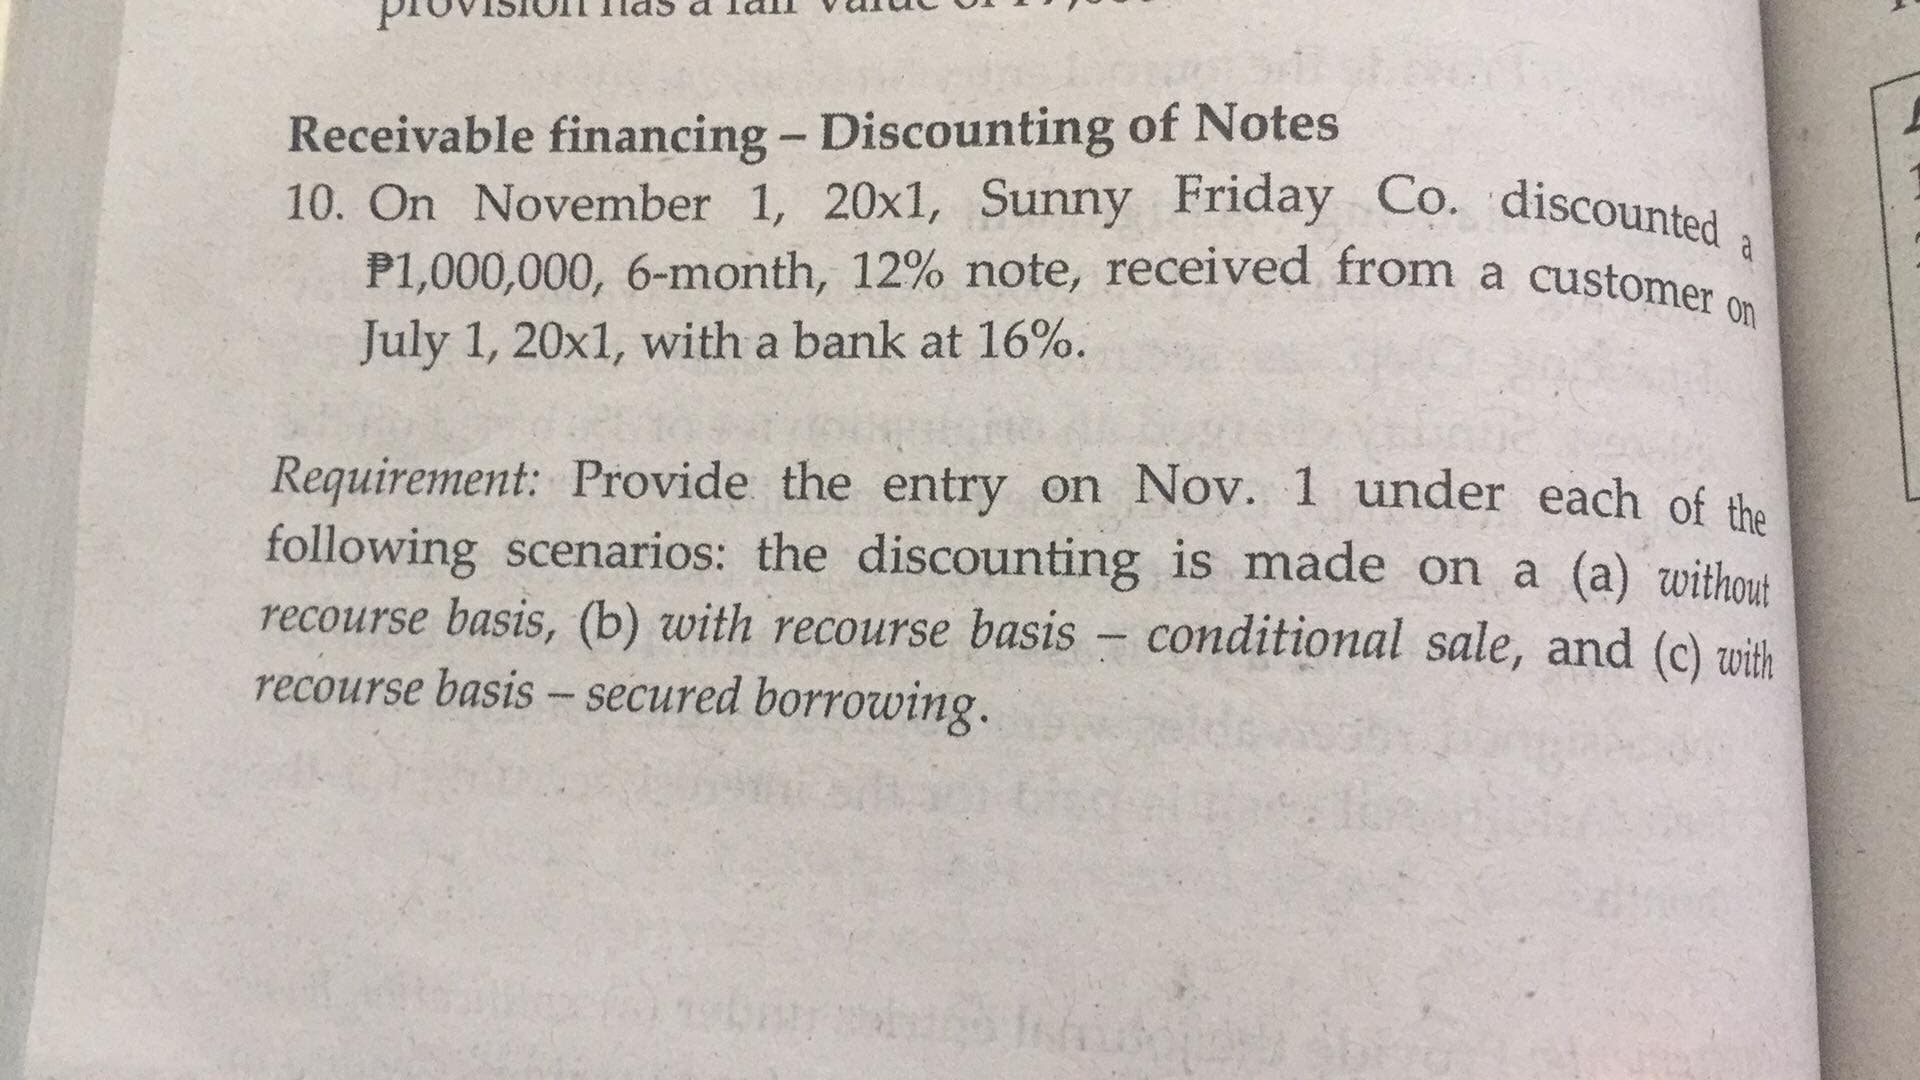 provision las a lall
aninA
Receivable financing - Discounting of Notes
P1,000,000, 6-month, 12% note, received from a customer
July 1, 20x1, with a bank at 16%.
Requirement: Provide the entry on Nov. 1 under each of the
following scenarios: the discounting is made on a (a) without
recourse basis, (b) with recourse basis – conditional sale, and (c) with
recourse basis - secured borrowing.
